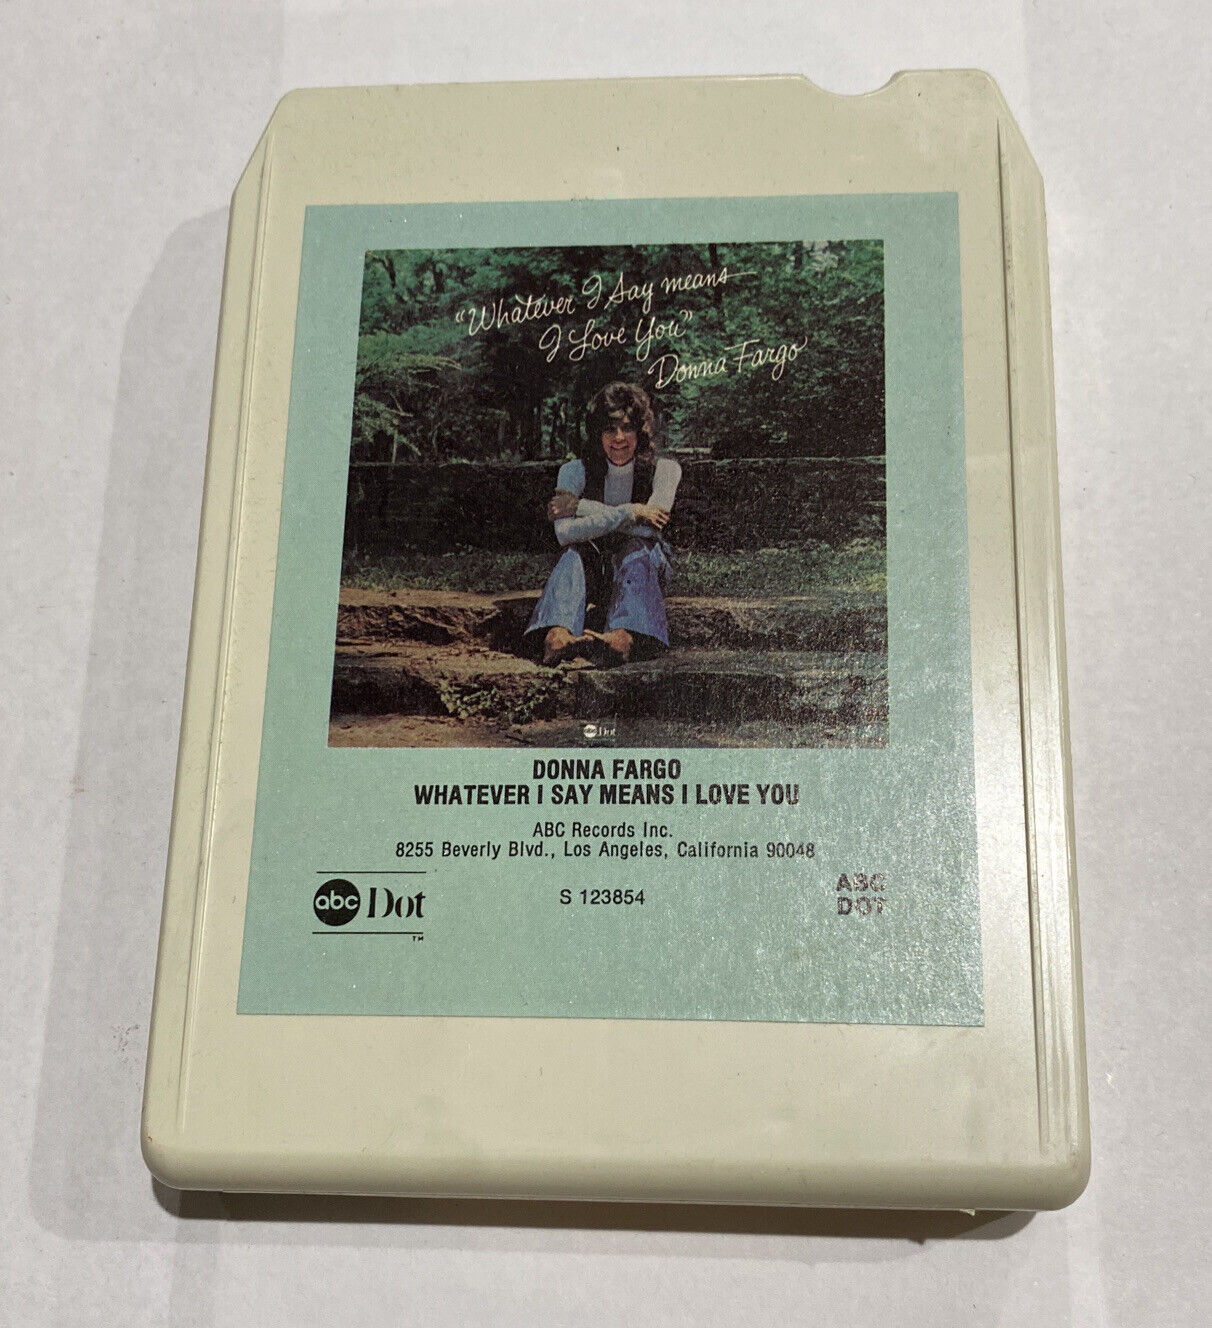 8 Track Tape DONNA FARGO - WHATEVER I SAY MEANS I LOVE YOU Little Bluebird 1975